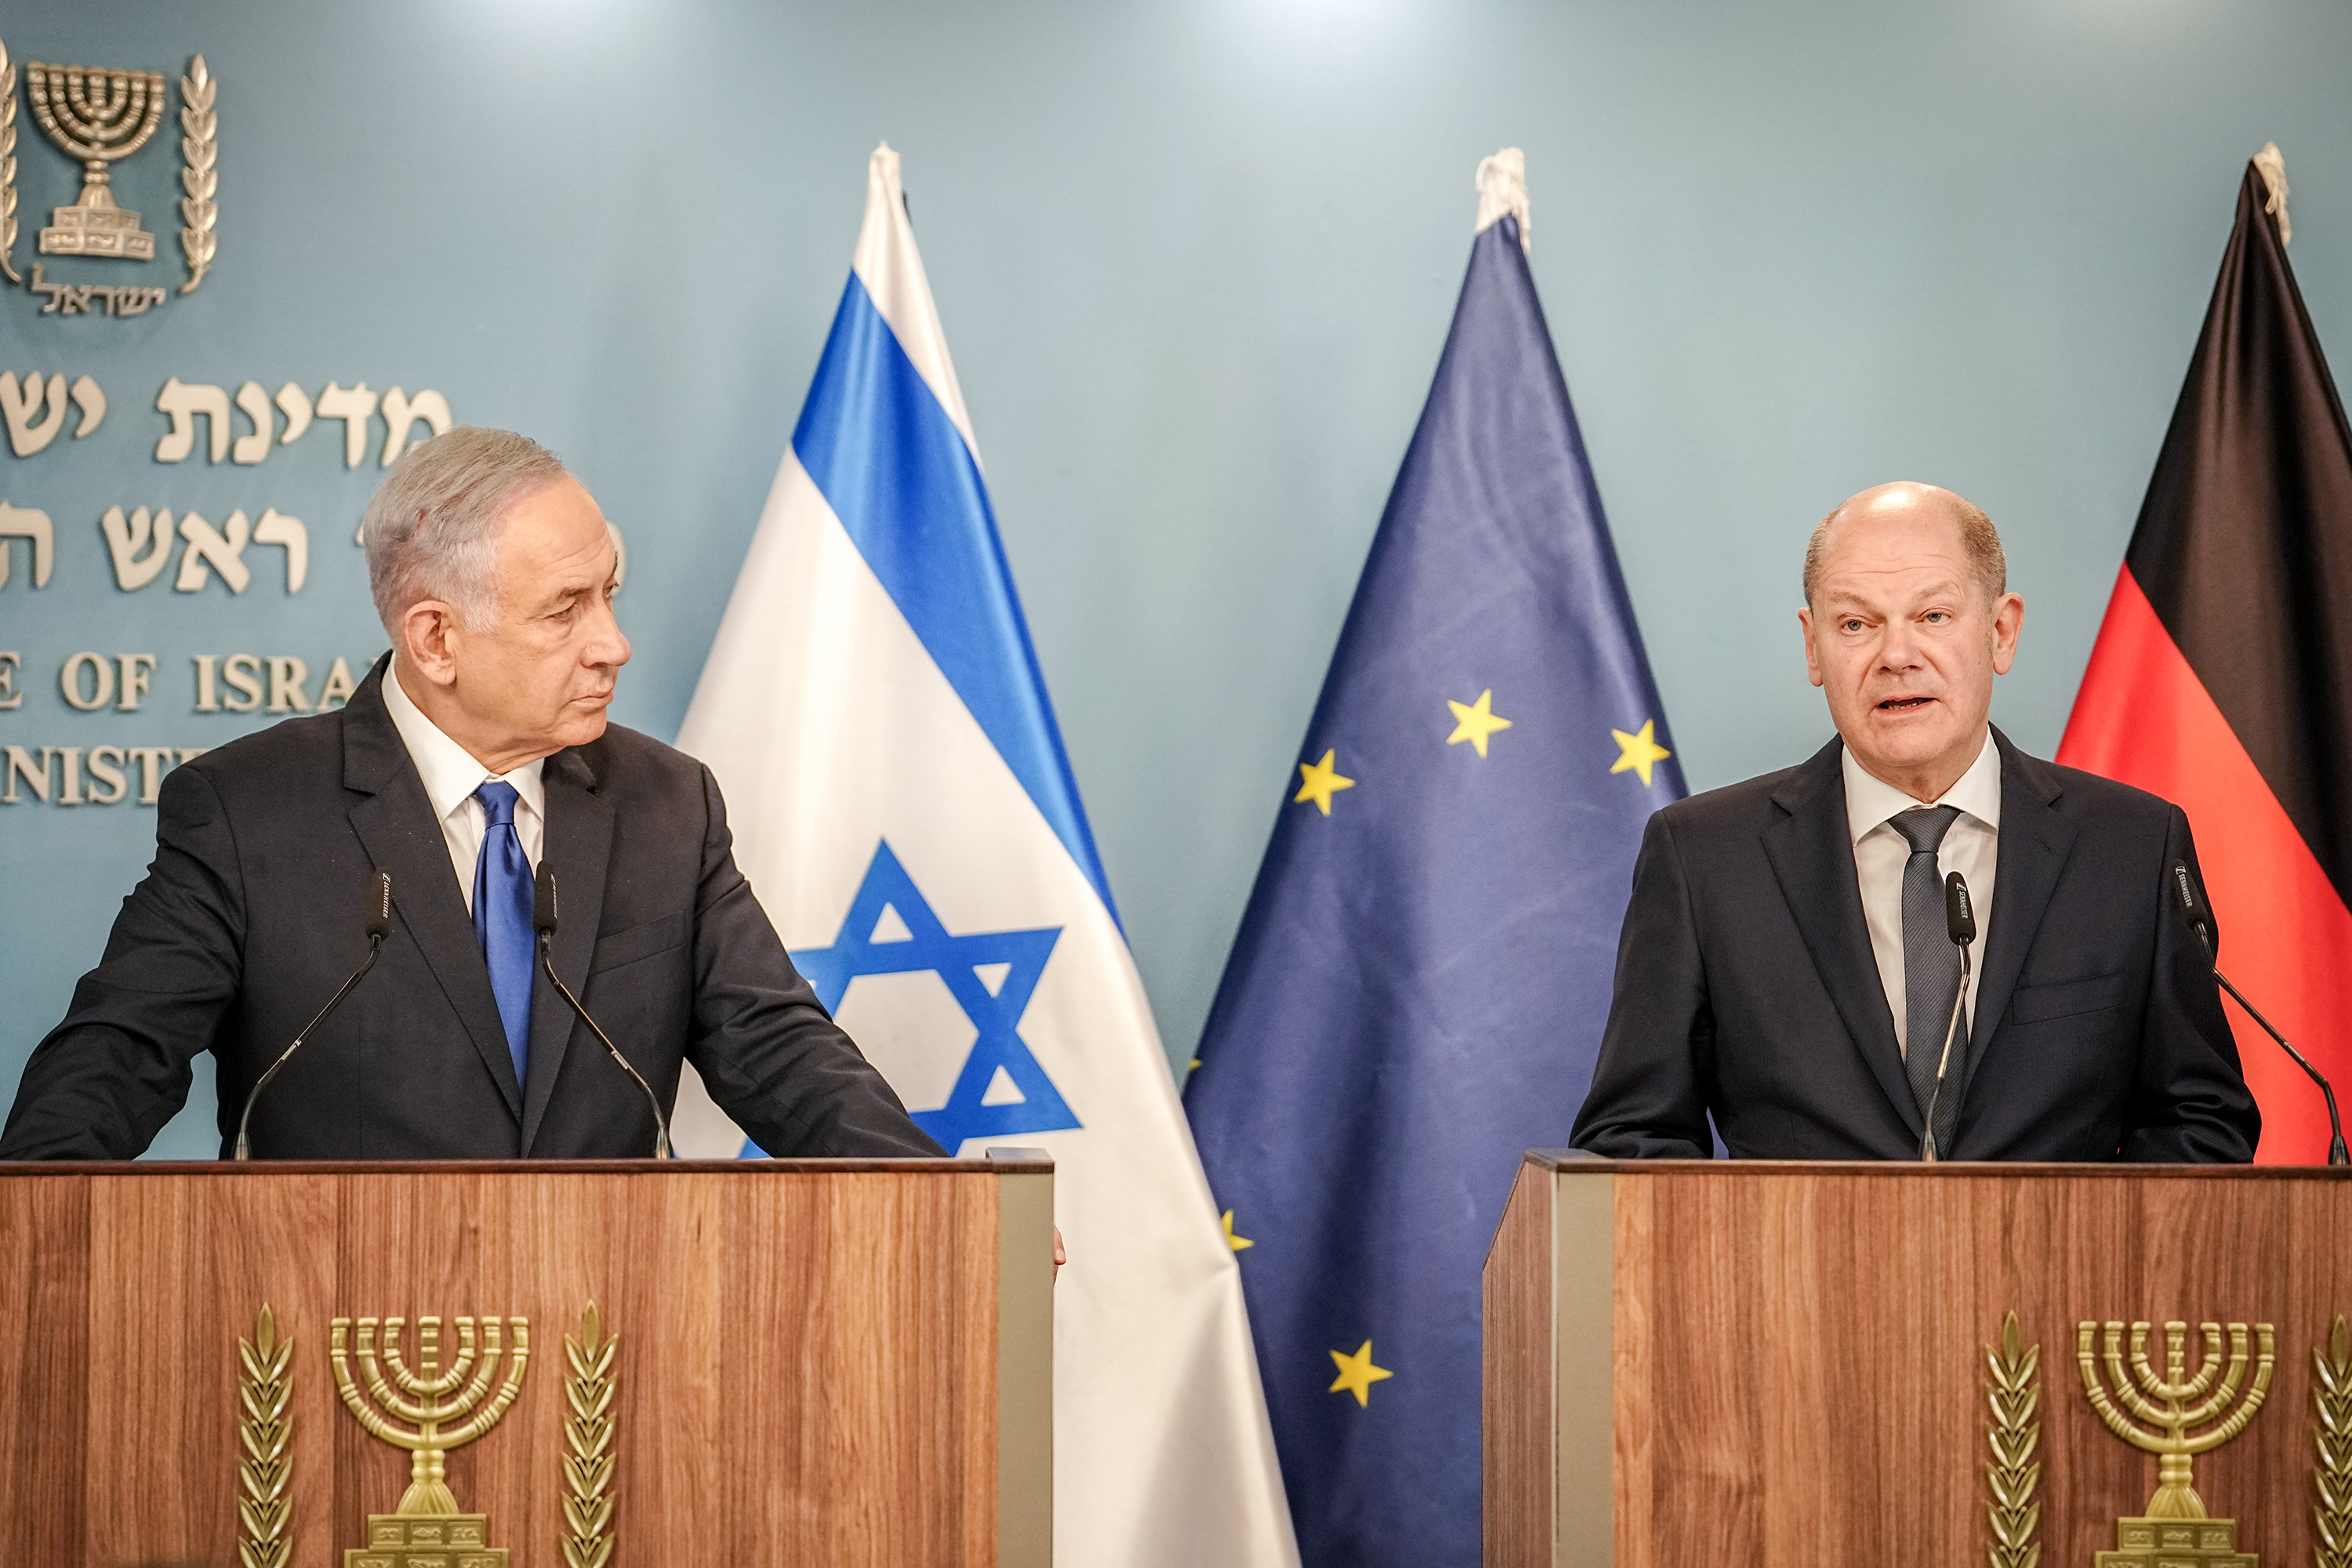 German Chancellor Olaf Scholz (Right) and Israeli Prime Minister Benjamin Netanyahu give a press statement in Jerusalem, Israel, on March 17.